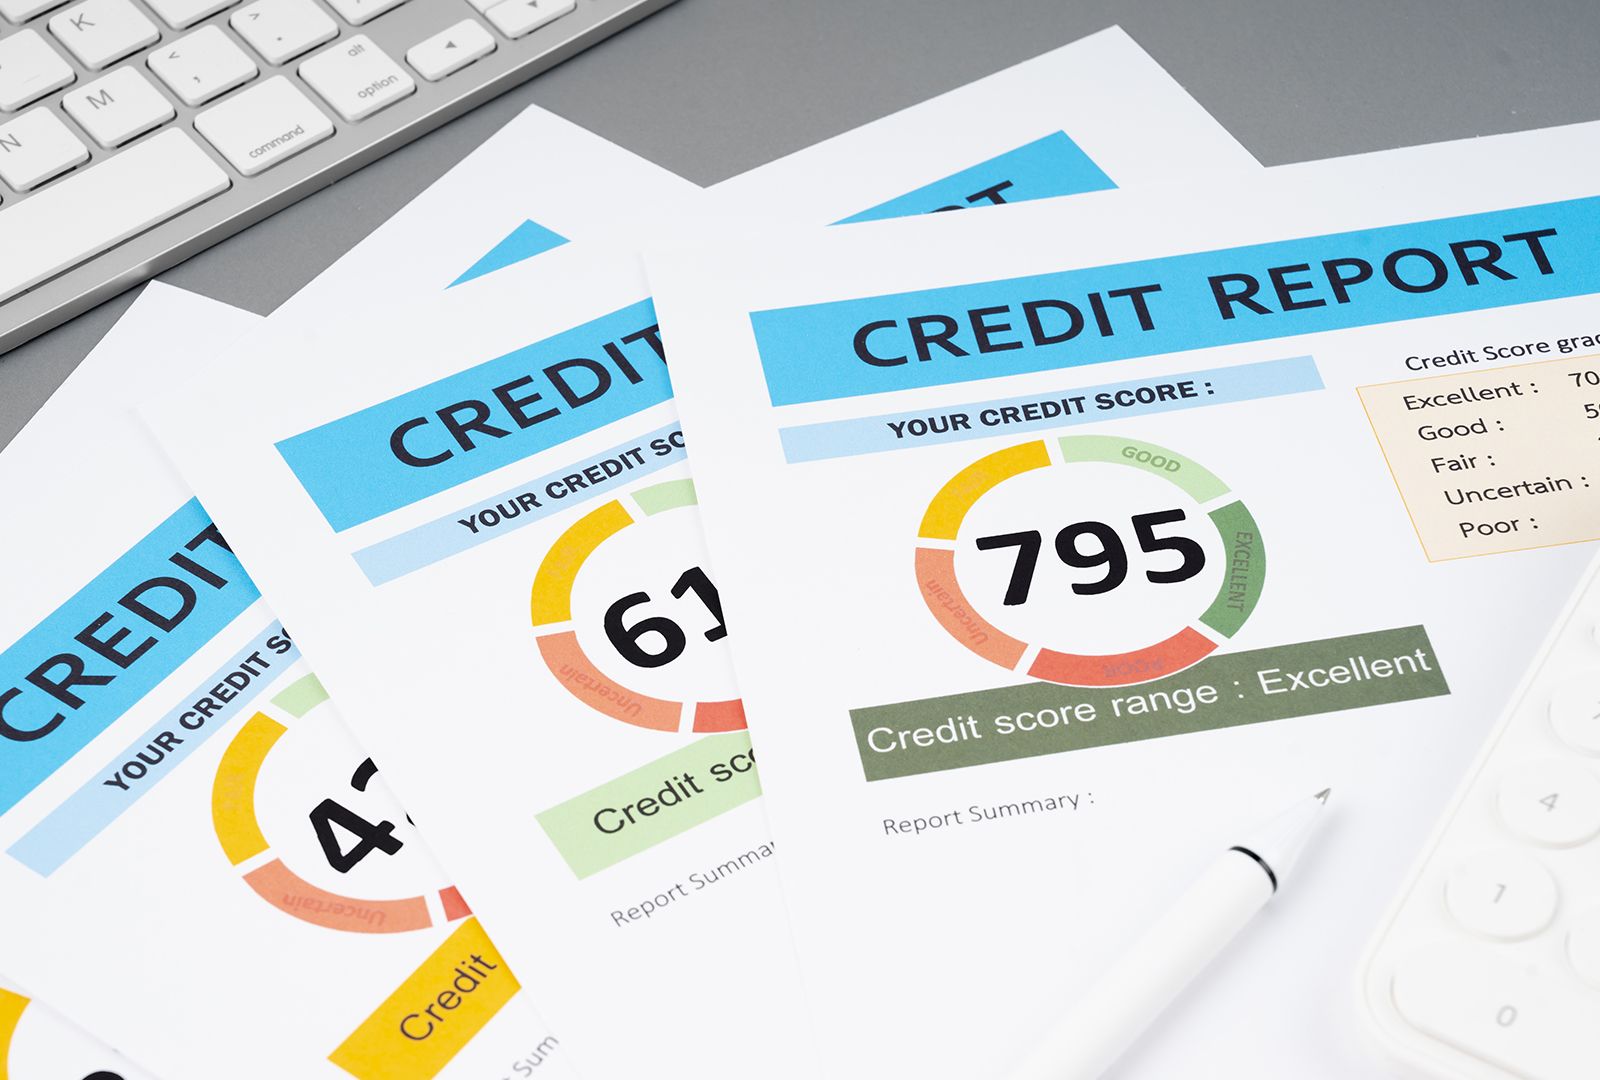 printed credit reports on desk showing rising scores